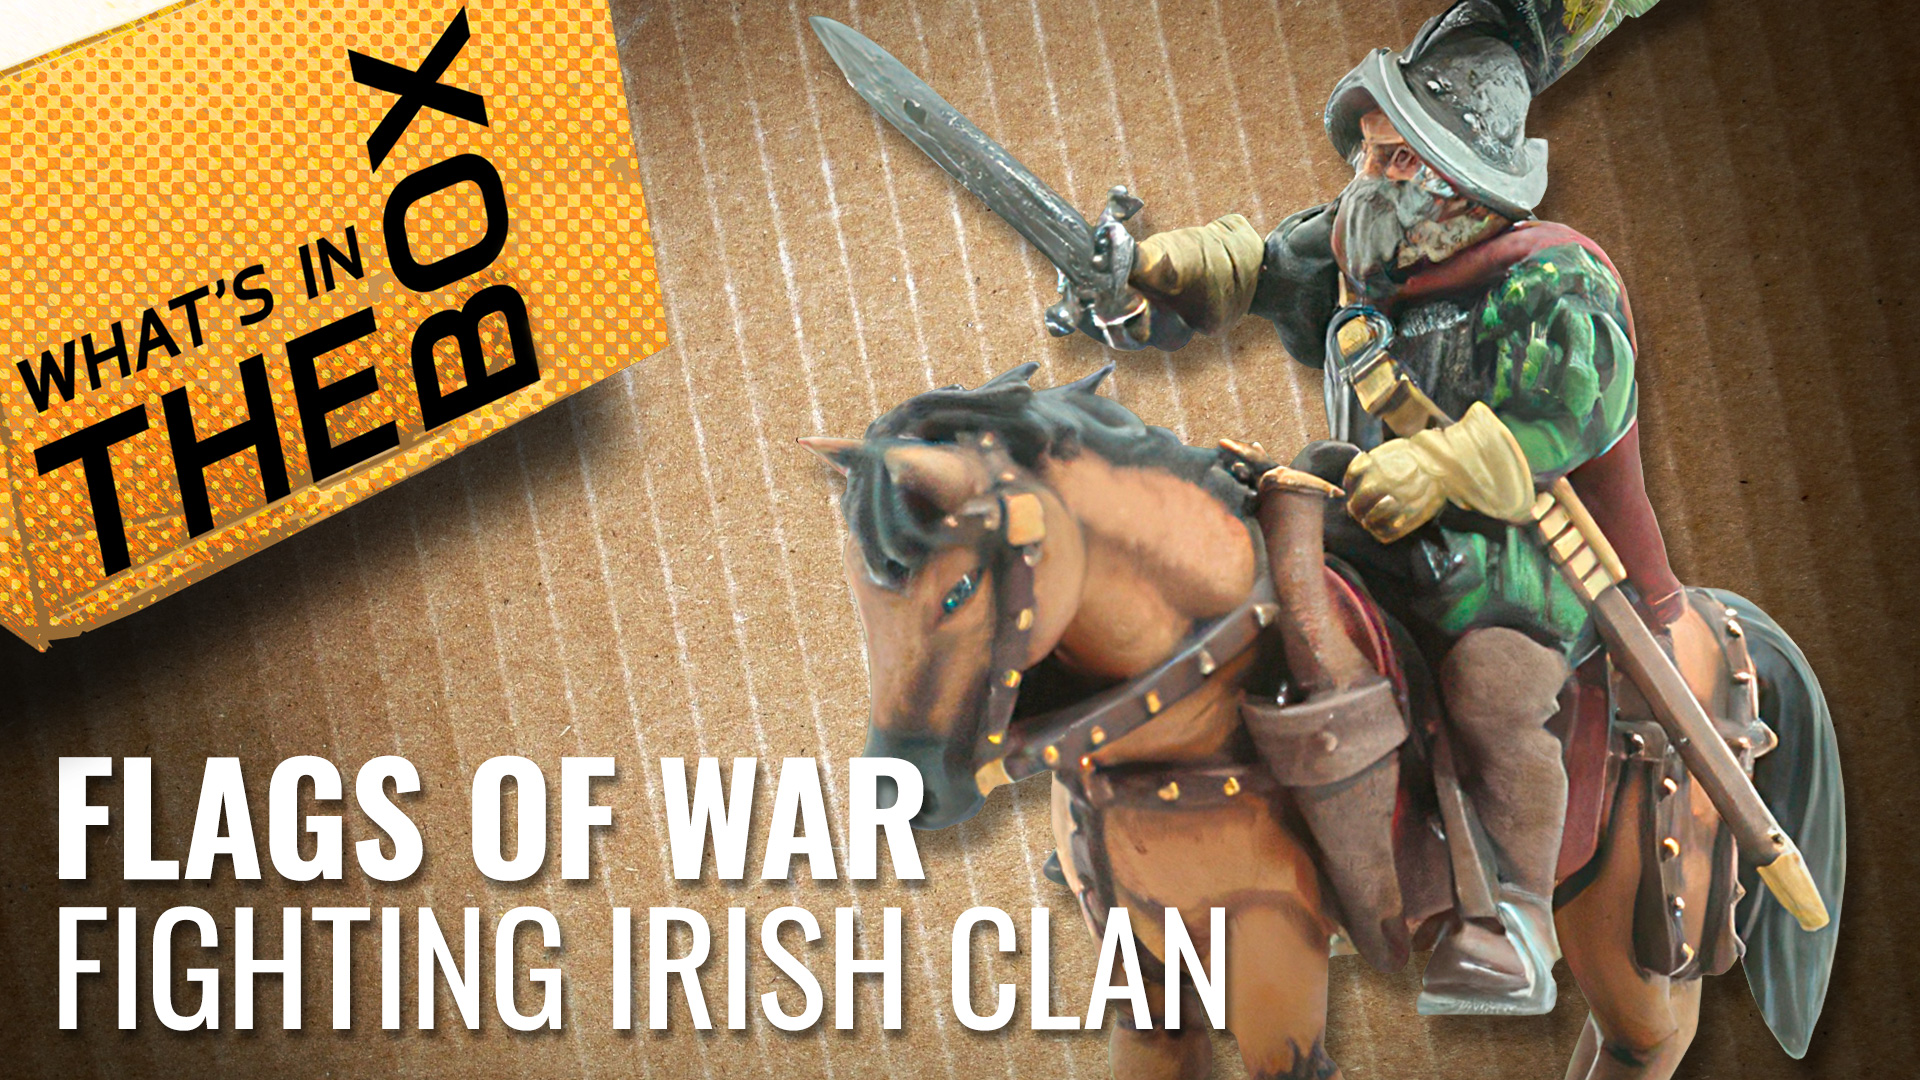 Unboxing-Fighting-Irish-Clan_Flags-of-War-coverimage2